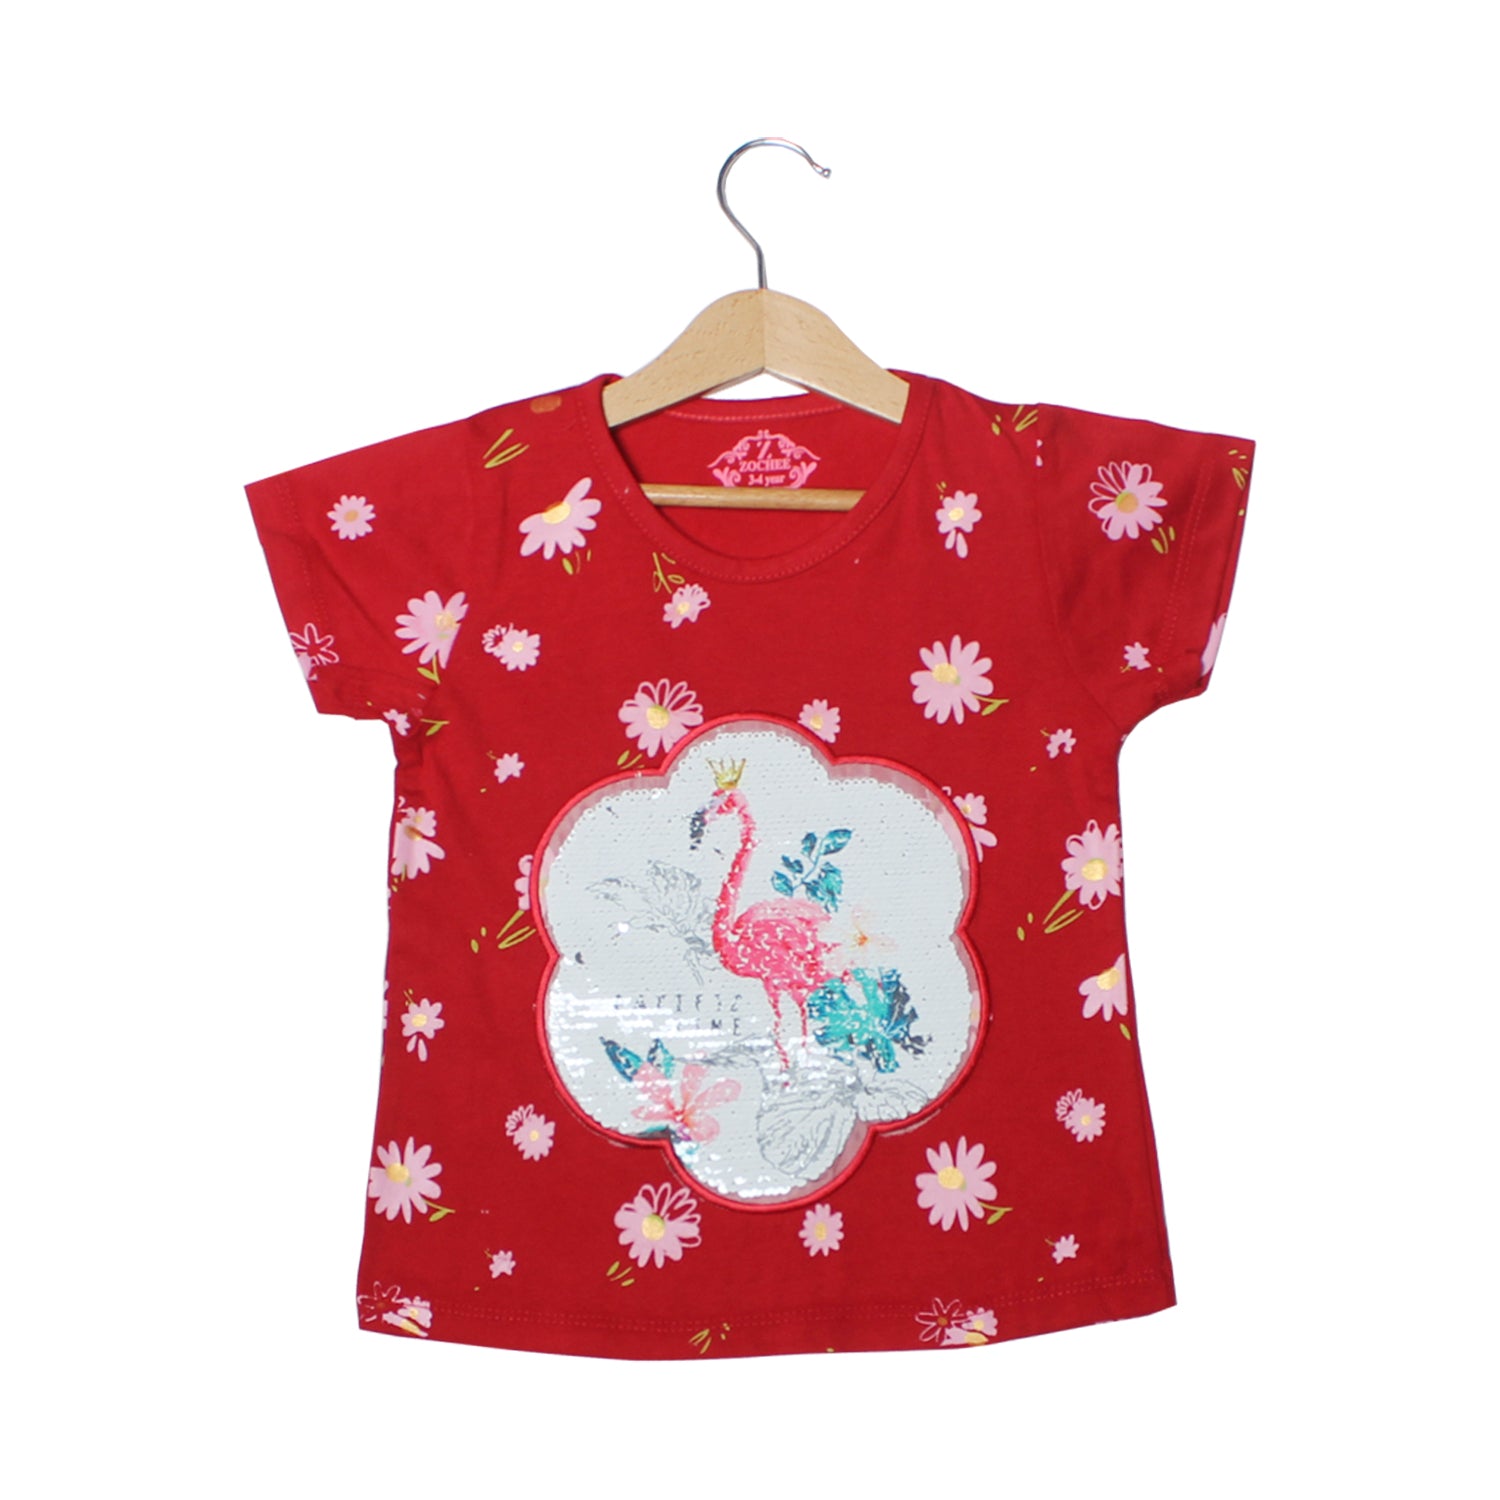 NEW RED FLOWER WITH SWAN PATCH PRINTED T-SHIRT TOP FOR GIRLS